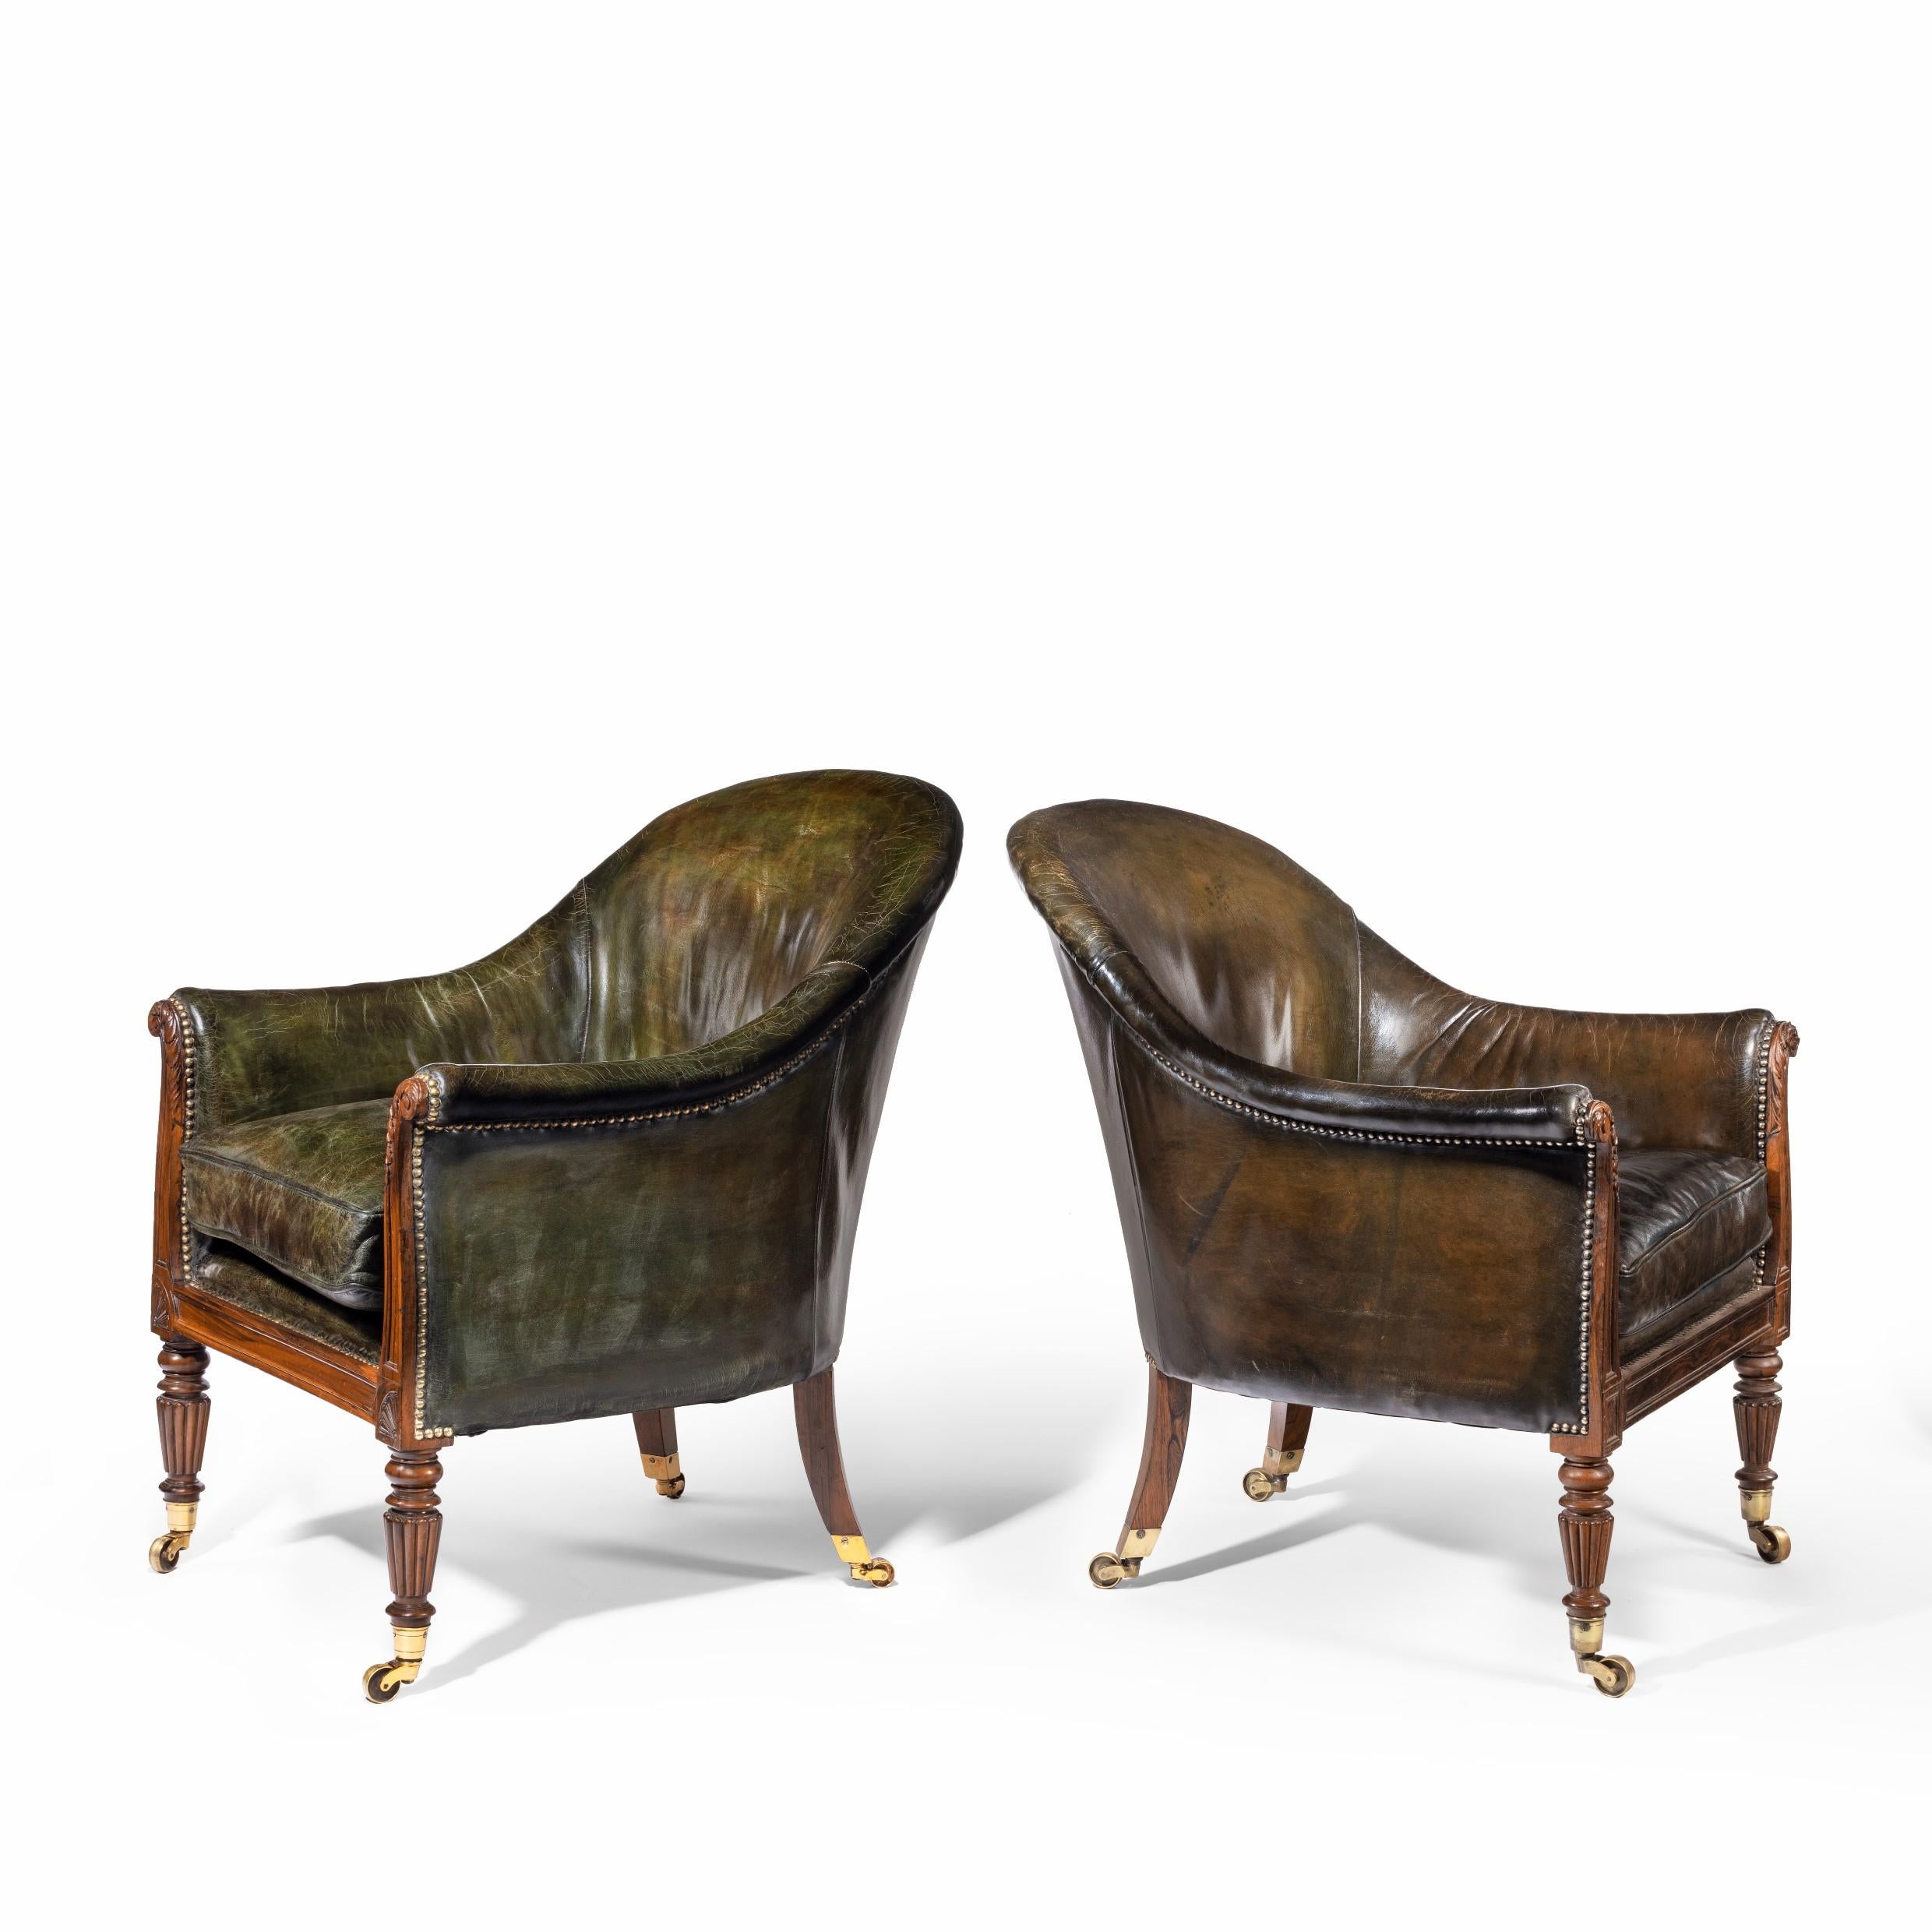 Early 19th Century Matched Pair of Gillows Mahogany Library Chairs